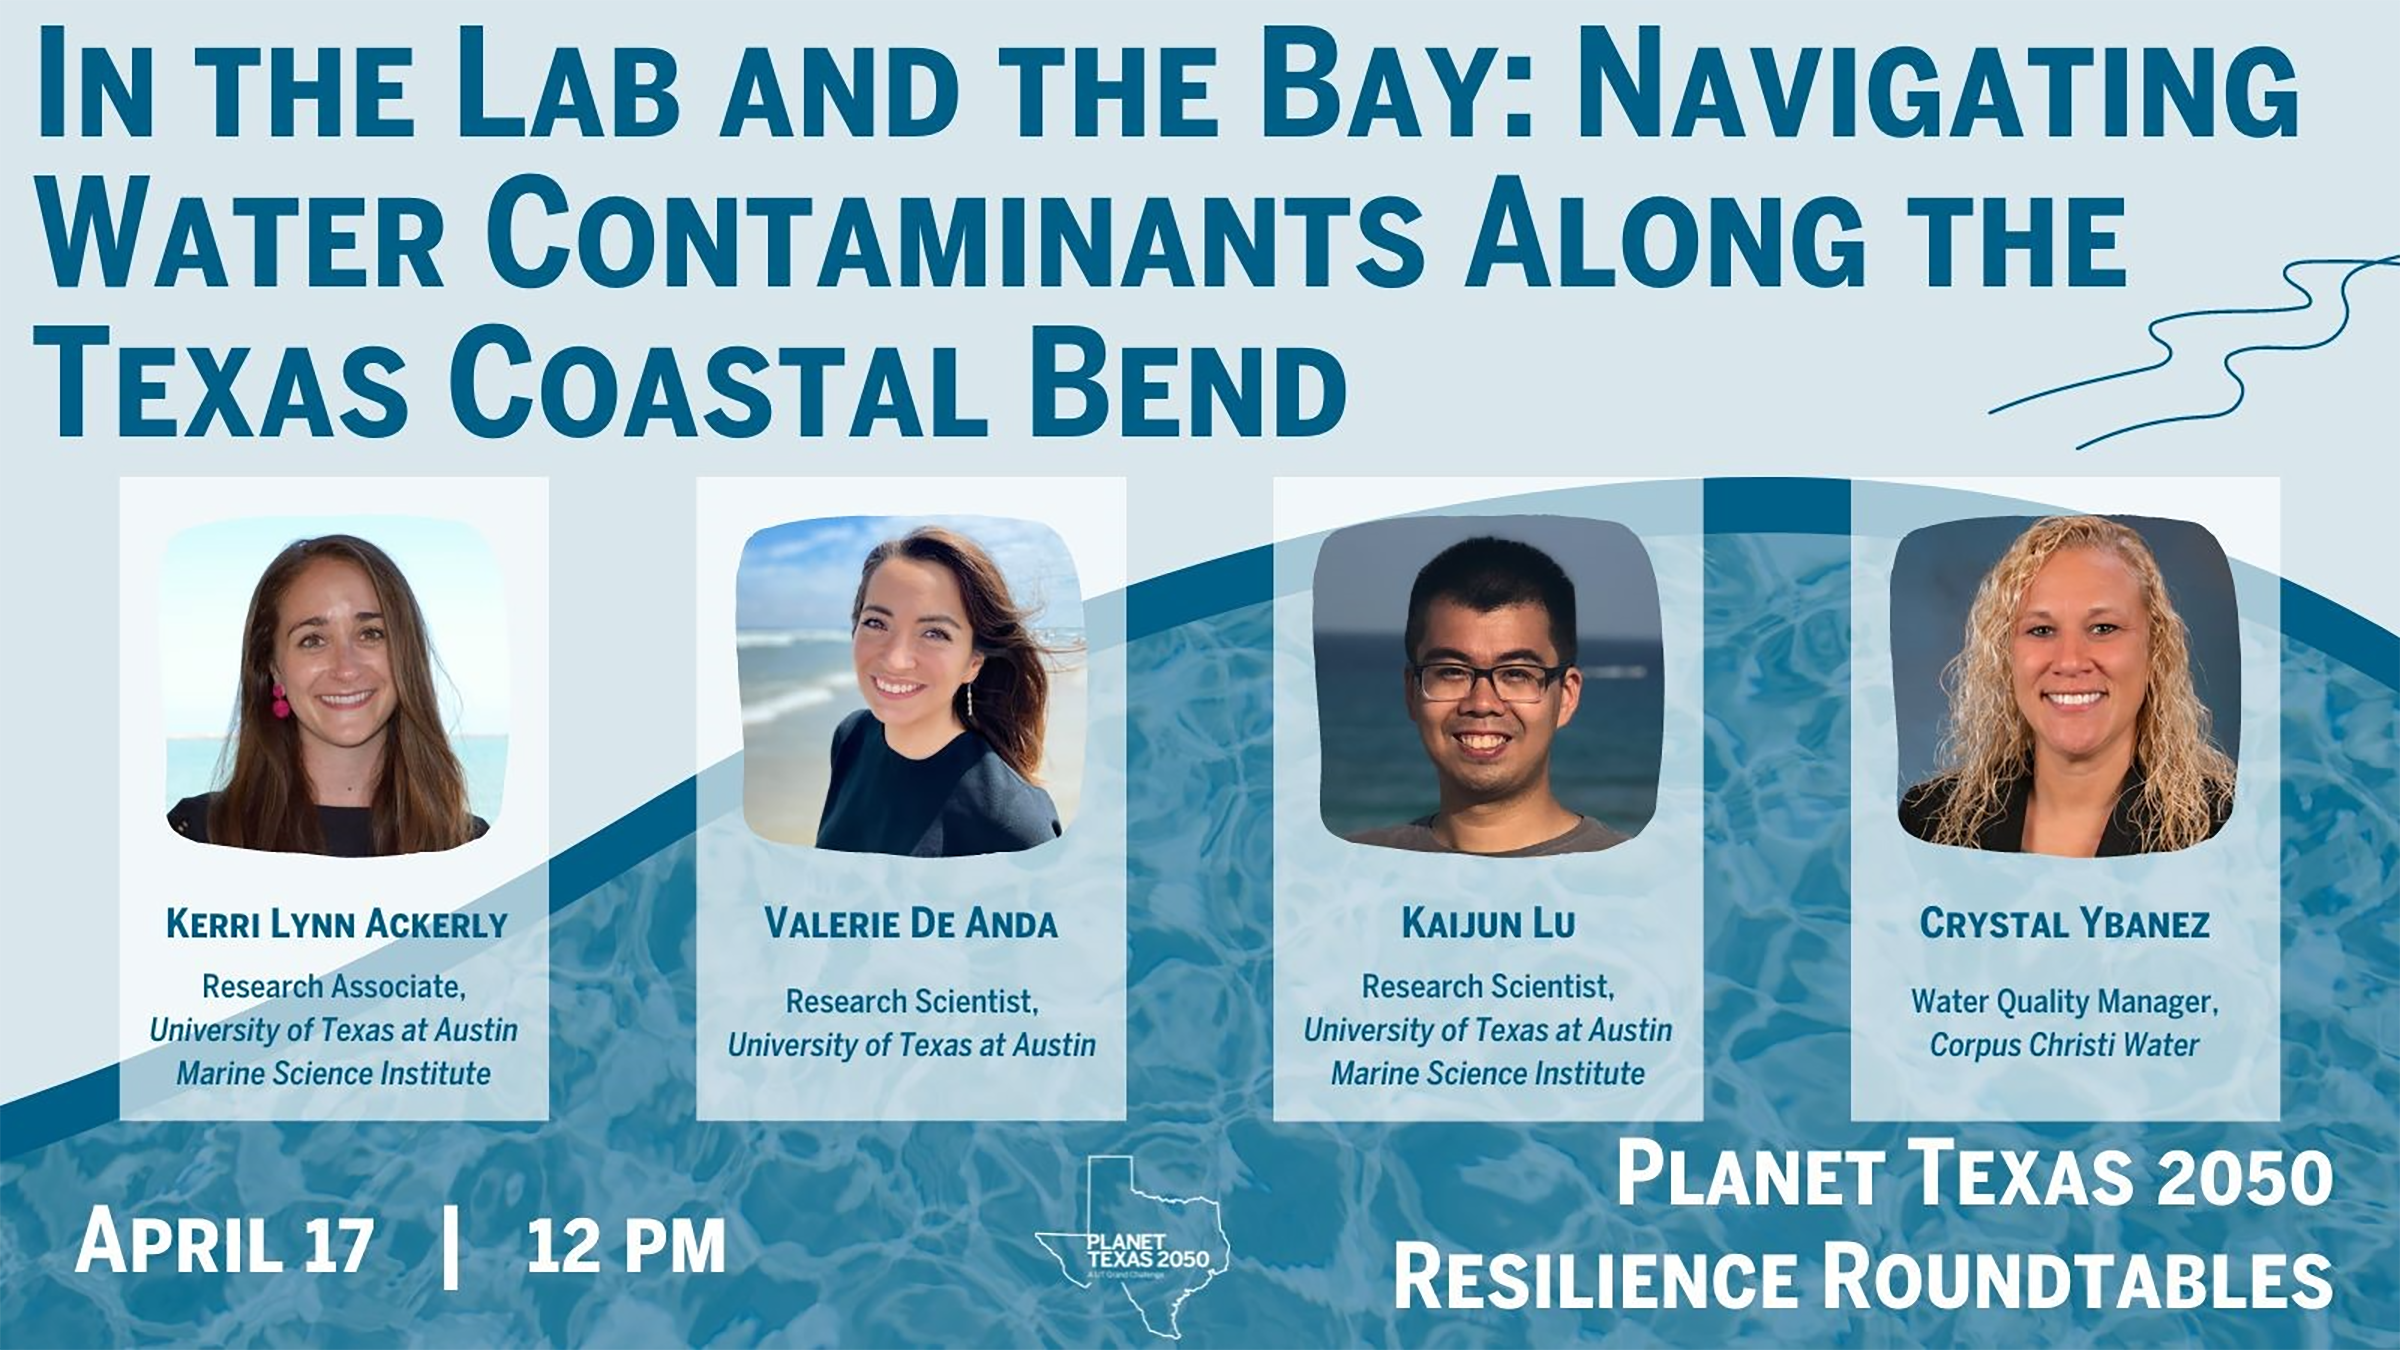 In the Lab and the Bay: Navigating Water Contaminants Along the Texas Coastal Bend